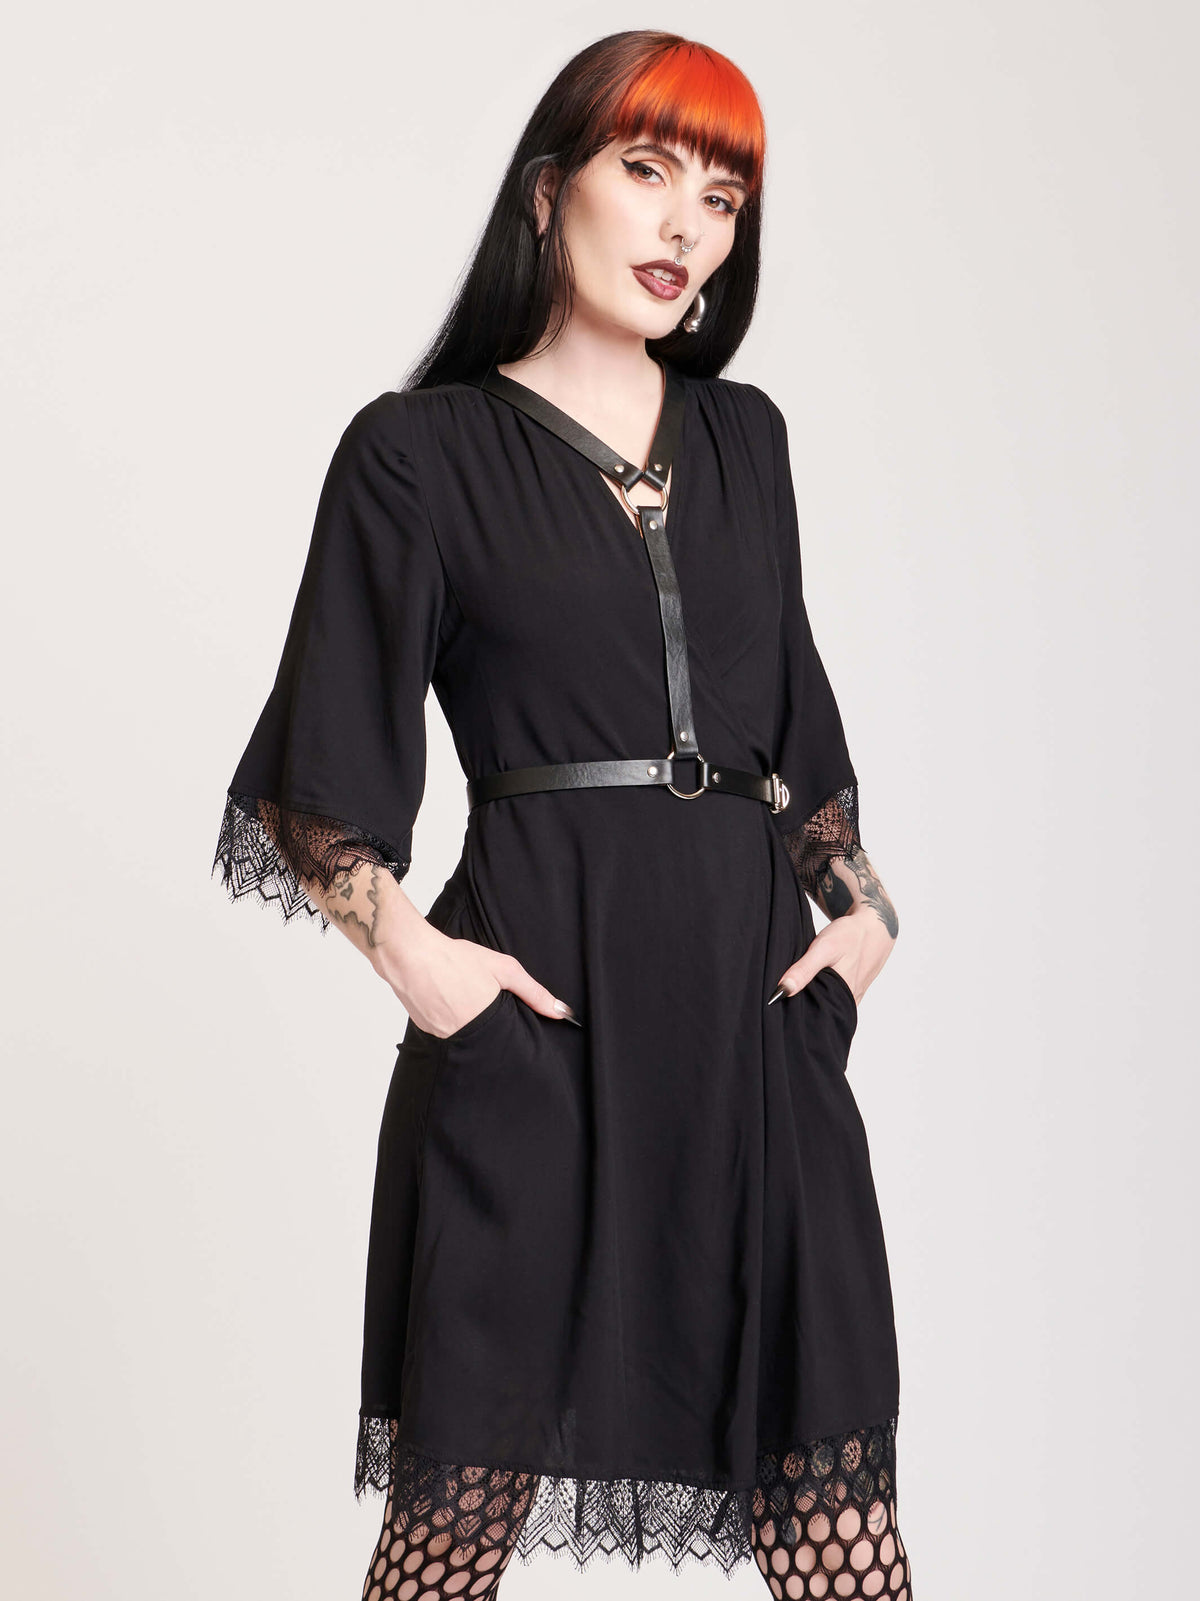 wrap dress wuth lace trim on arms and hem